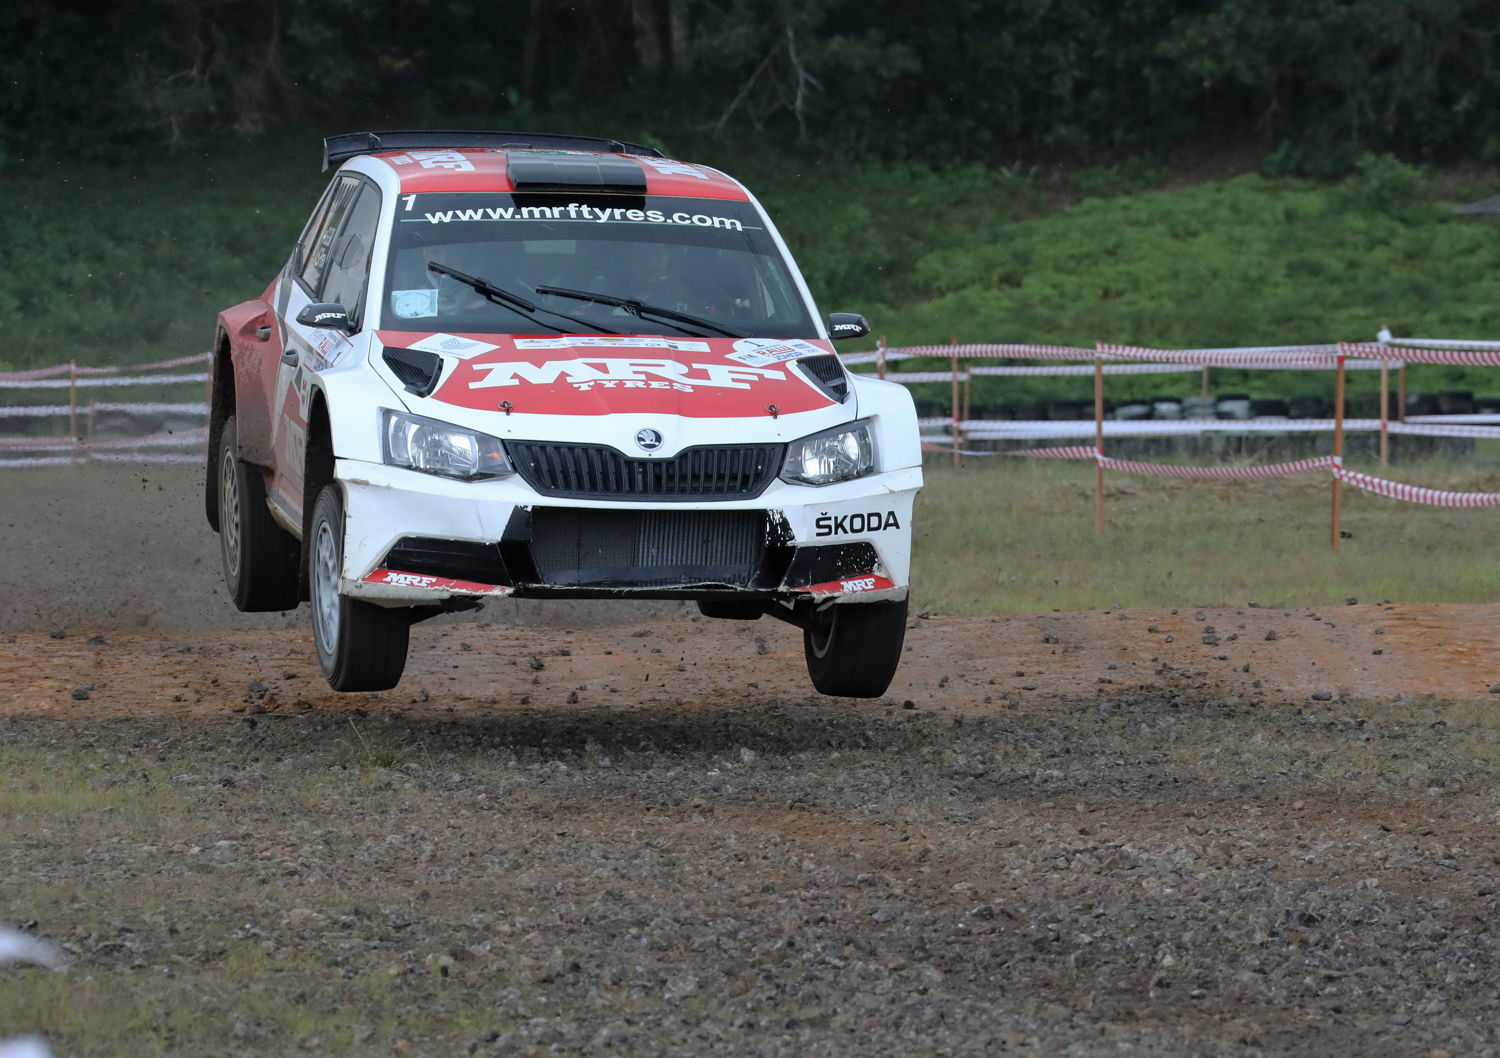 Gaurav Gill and co-driver Stéphane Prévot, driving a ŠKODA FABIA R5 run by Team MRF ŠKODA, won Rally Hokkaido and are now in the best position to win the FIA 2017 Asia-Pacific Rally Championship.